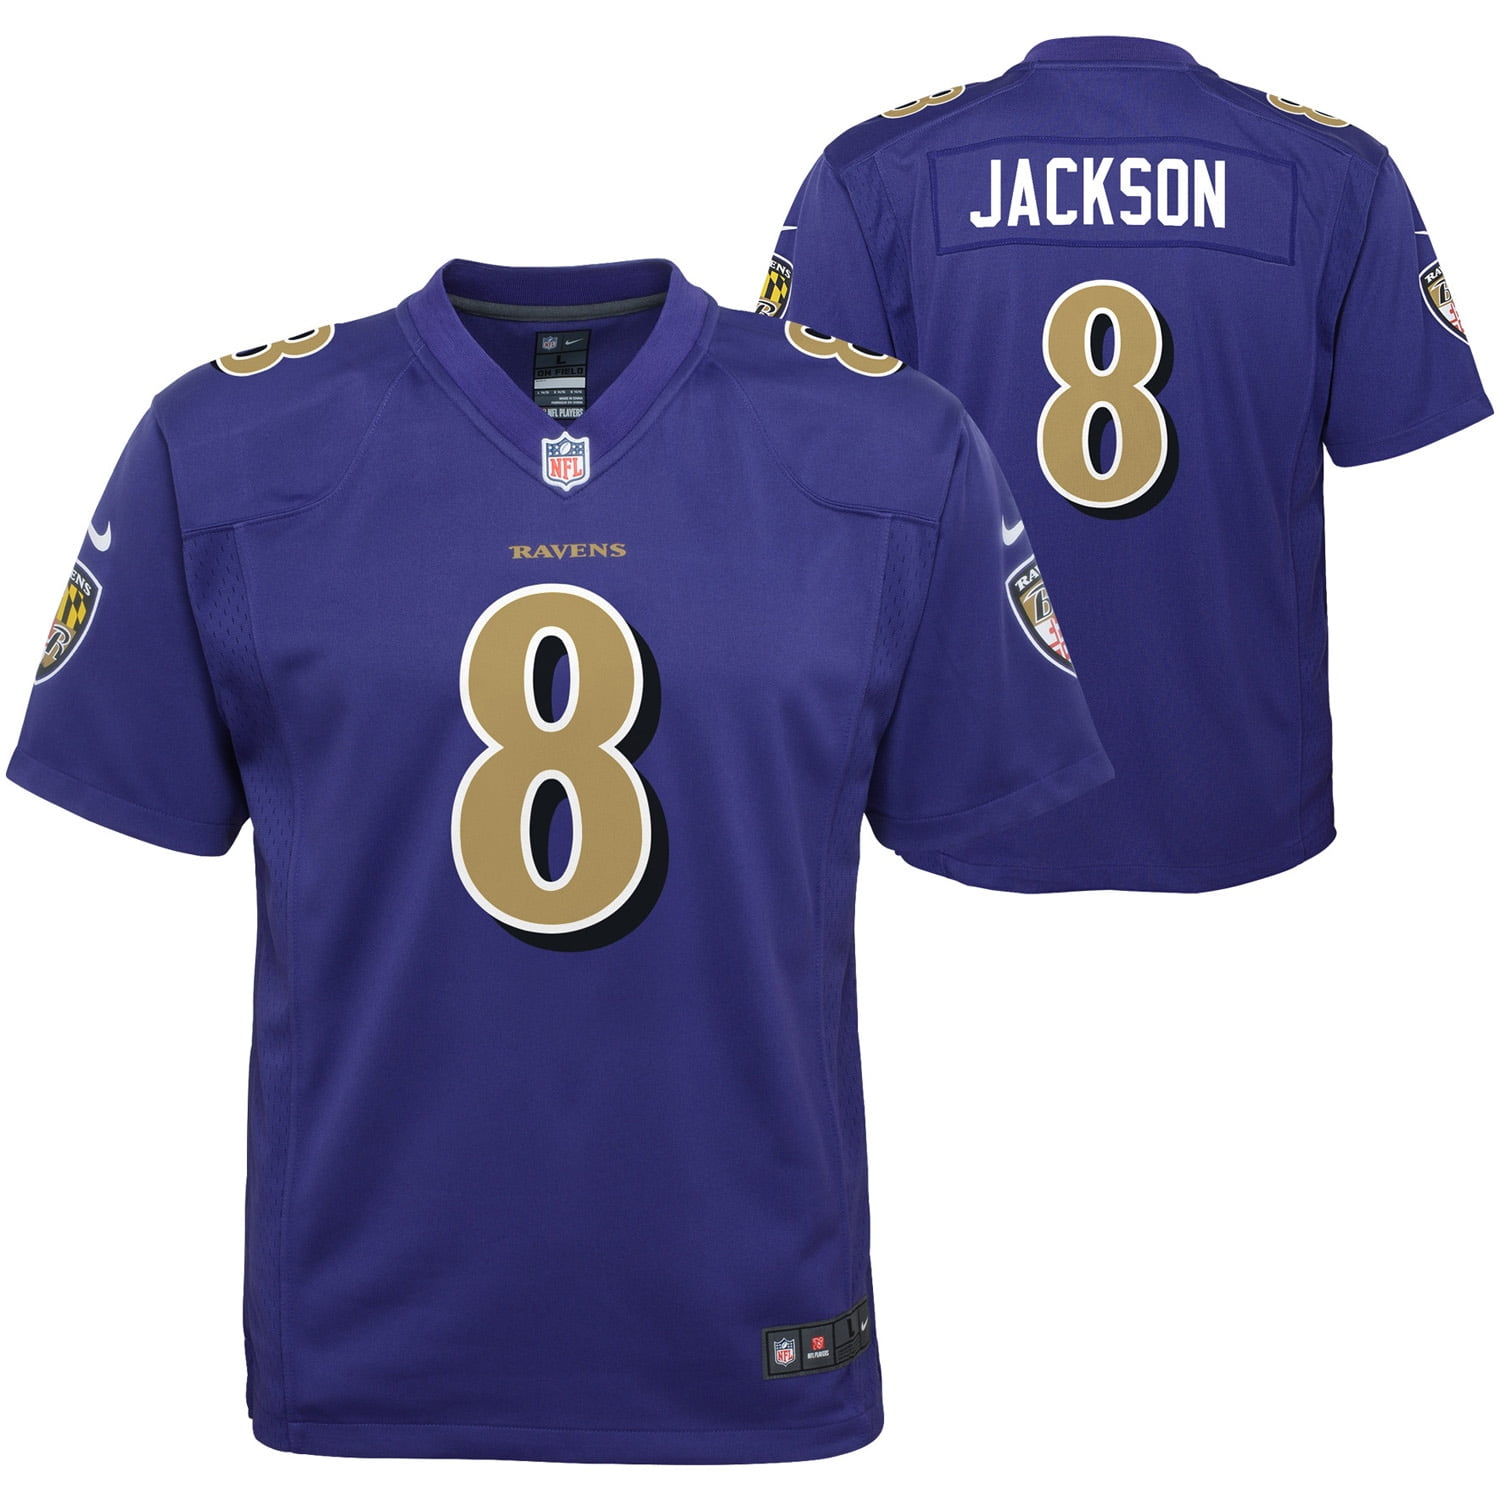 baltimore ravens home jersey colors